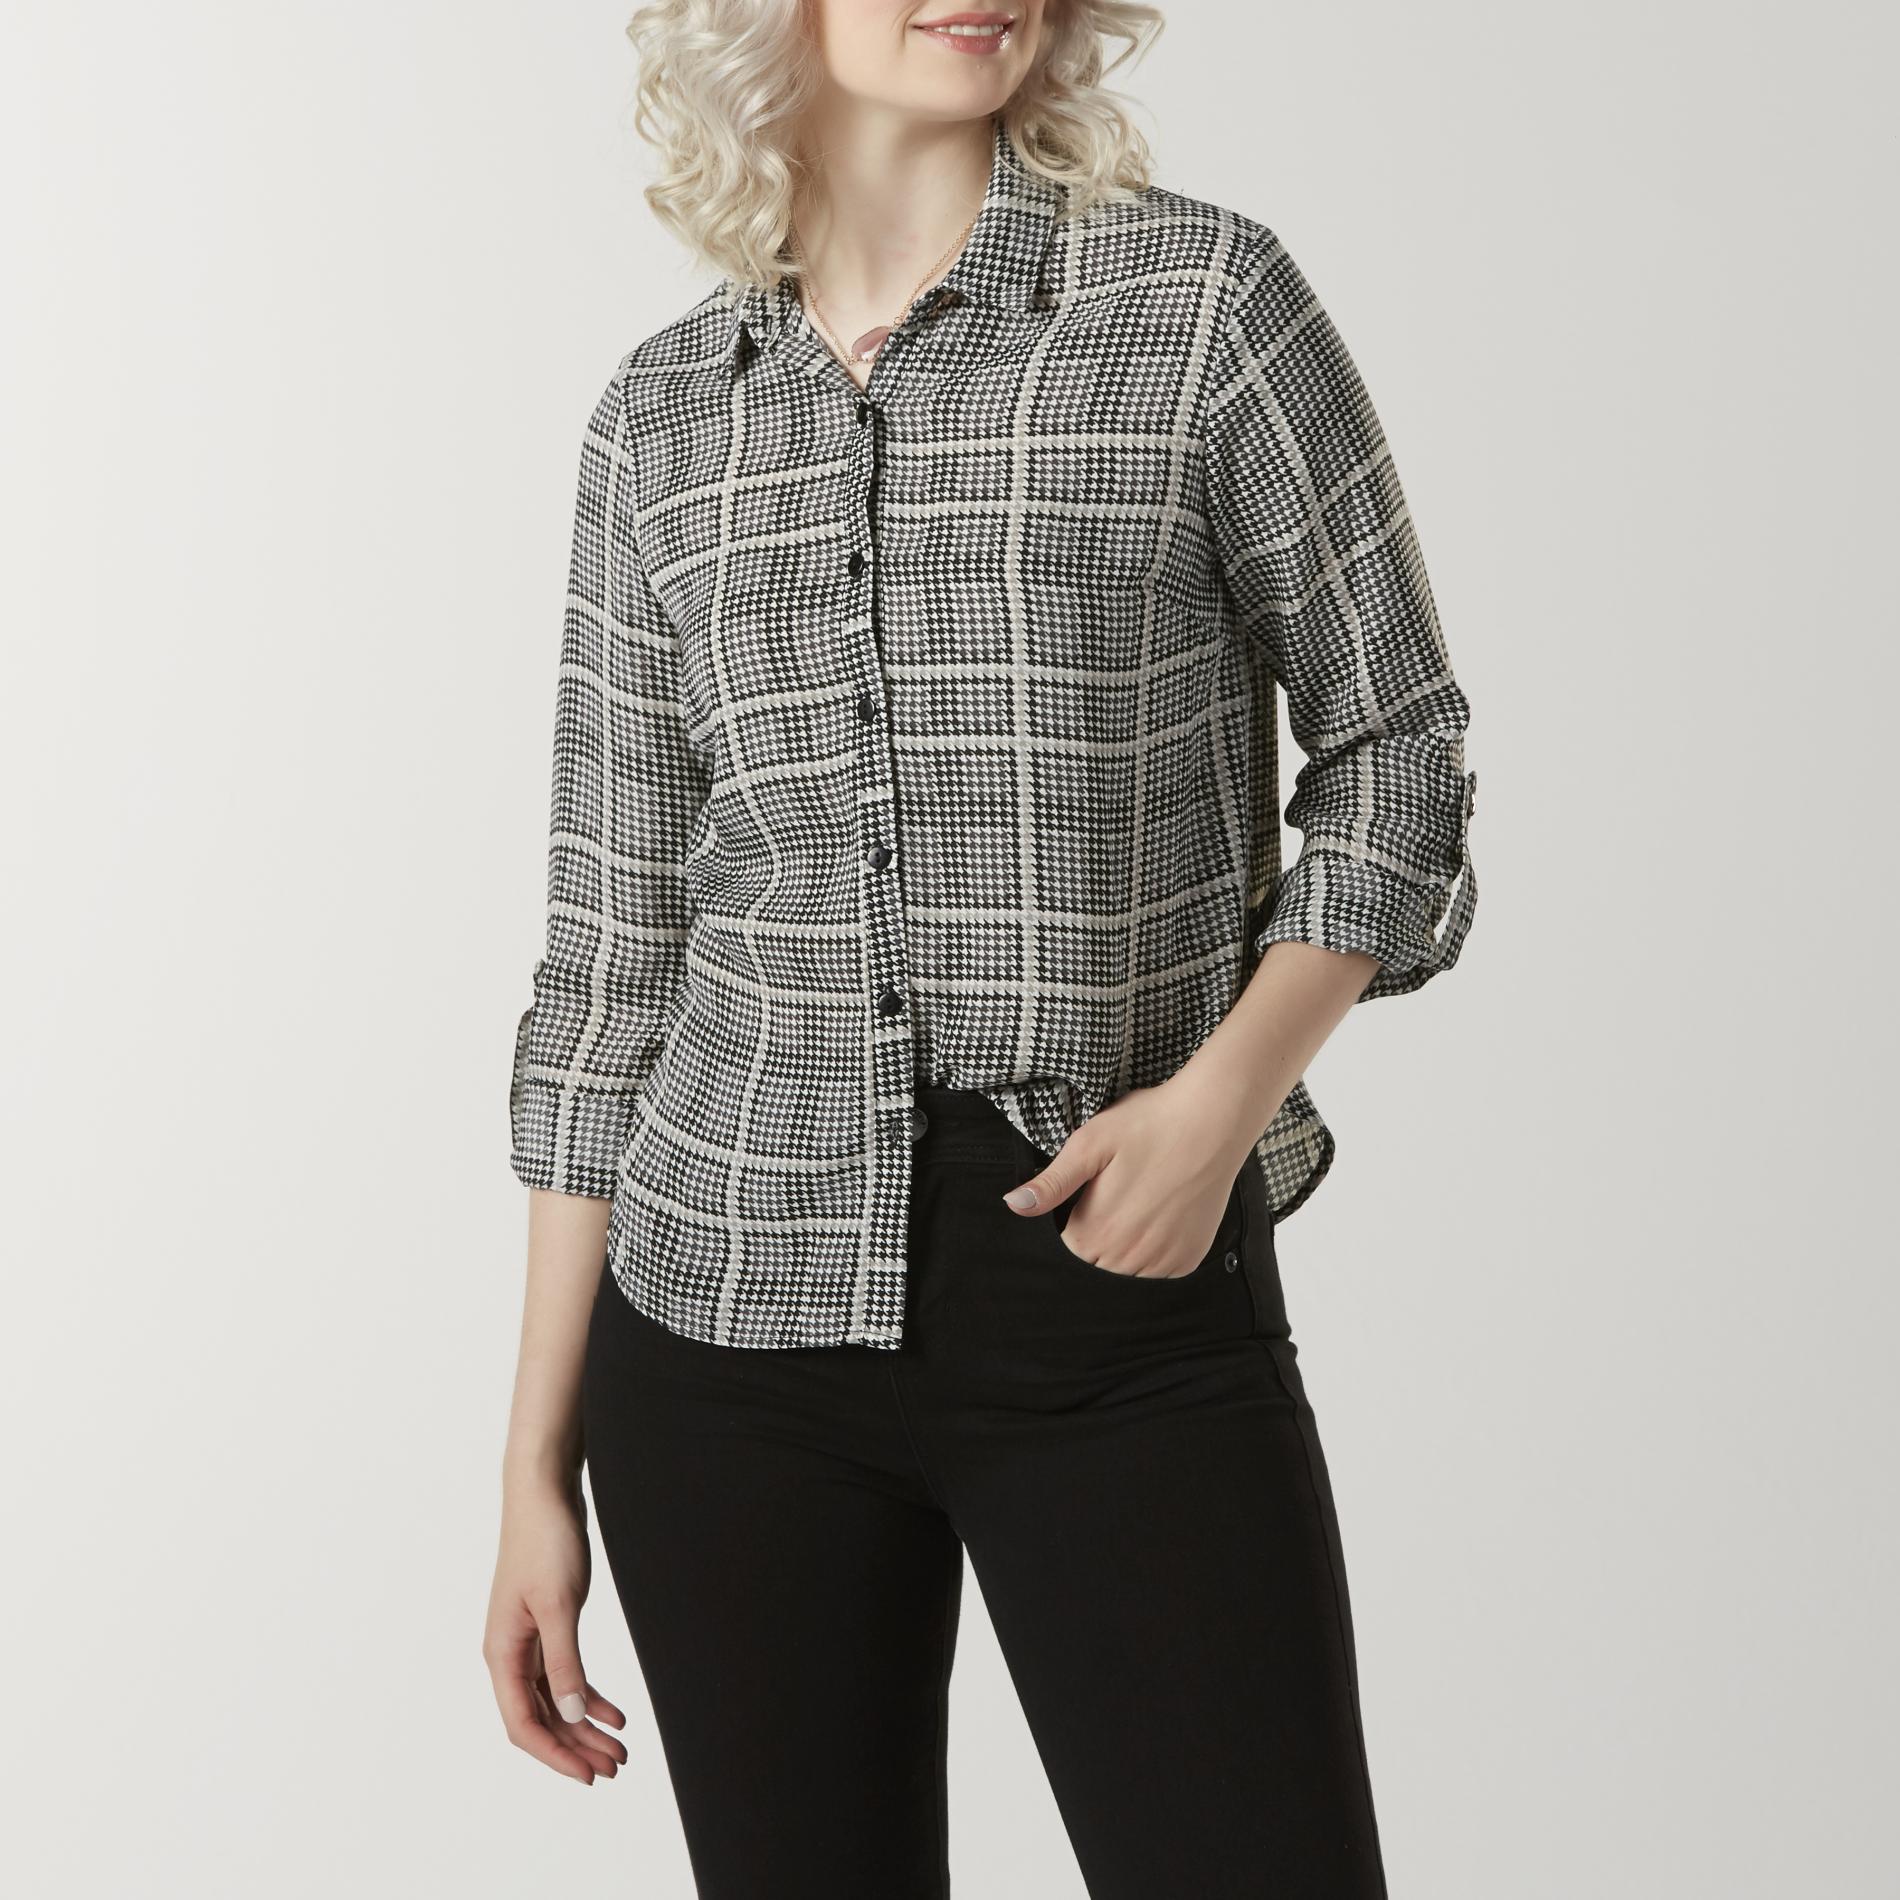 Simply Styled Women's Chiffon Blouse - Houndstooth Check